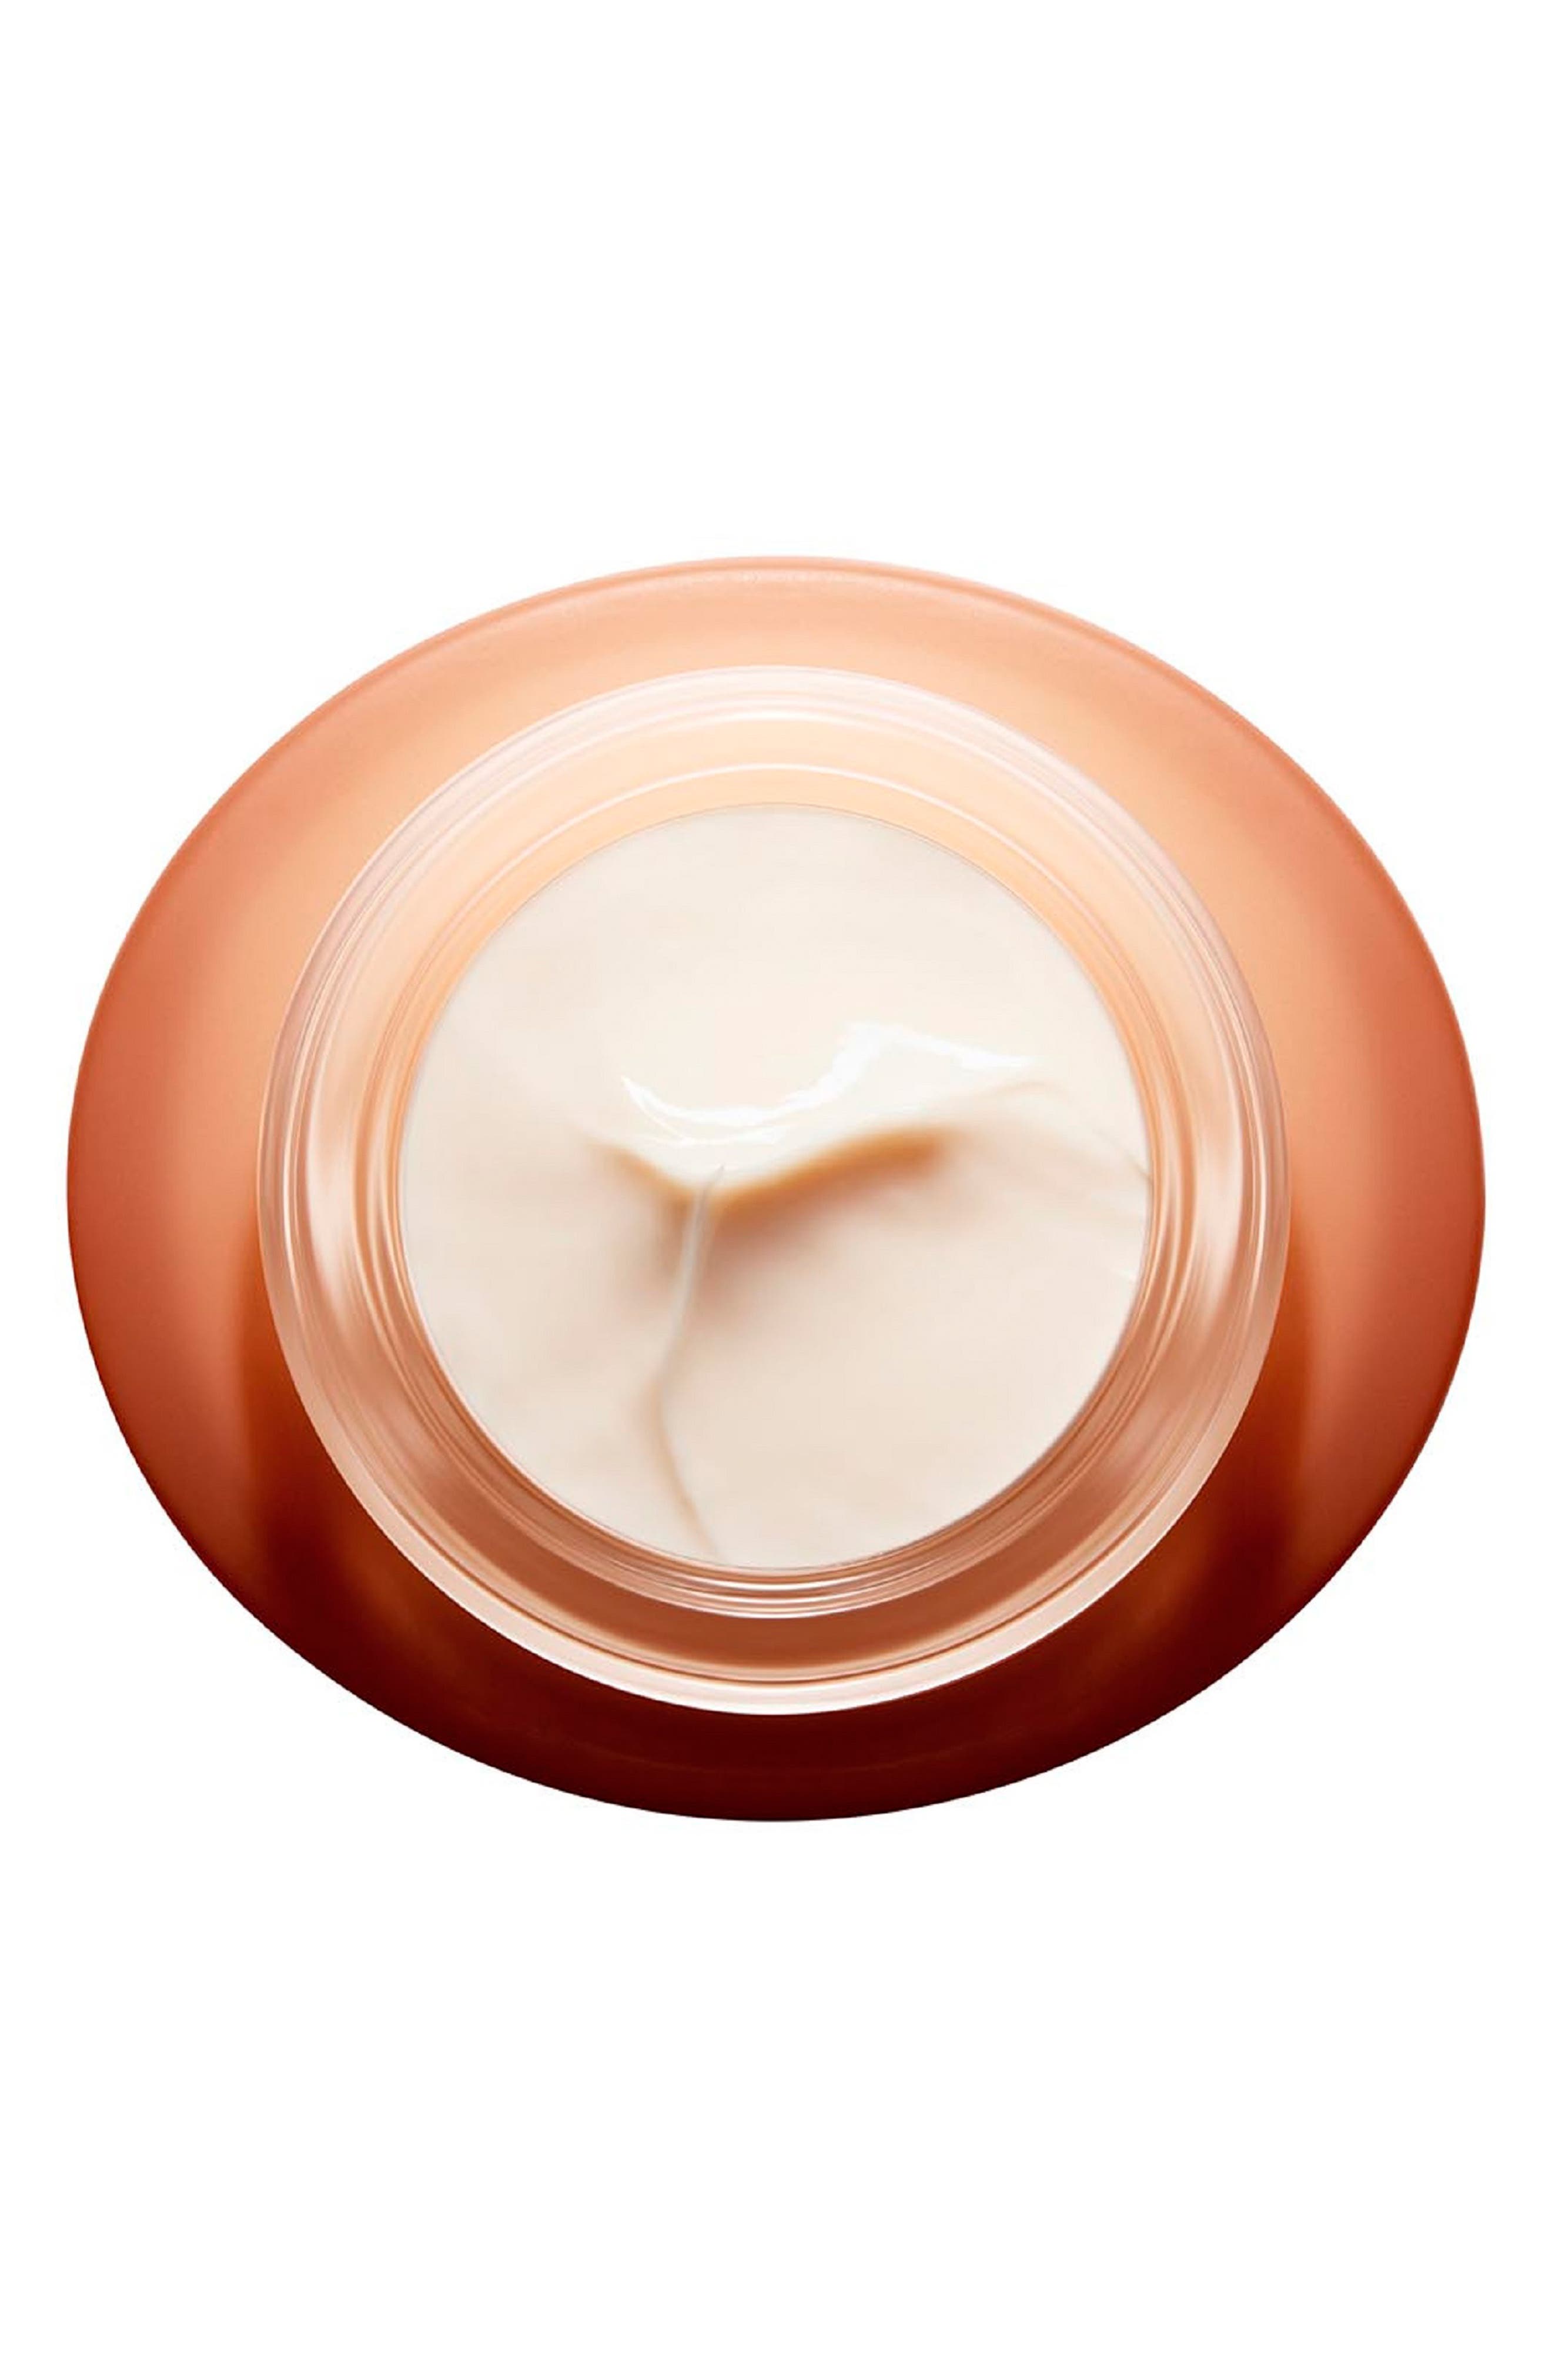 Clarins Extra-Firming Day Cream - All Skin Types